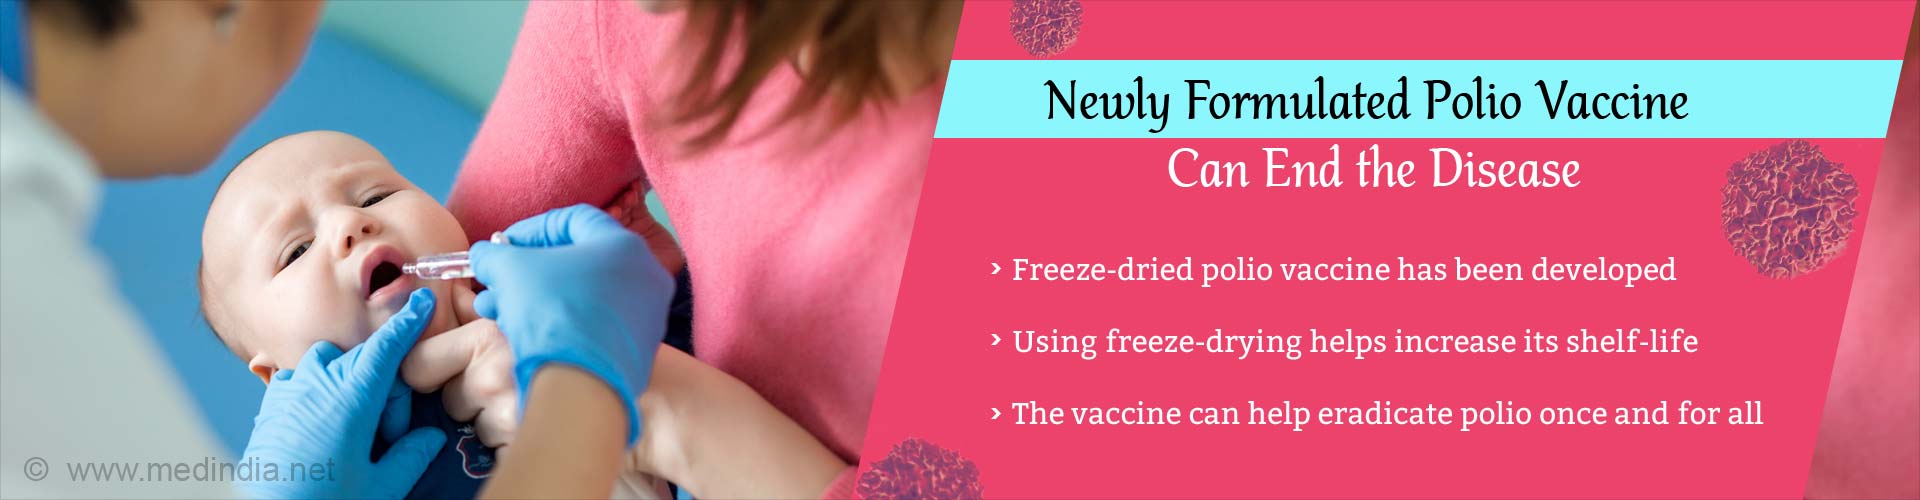 Newly formulated polio vaccine can end the disease. Freeze-dried polio vaccine has been developed. Using freeze-drying helps increase its shelf-life. The vaccine can help eradicate polio once and for all.